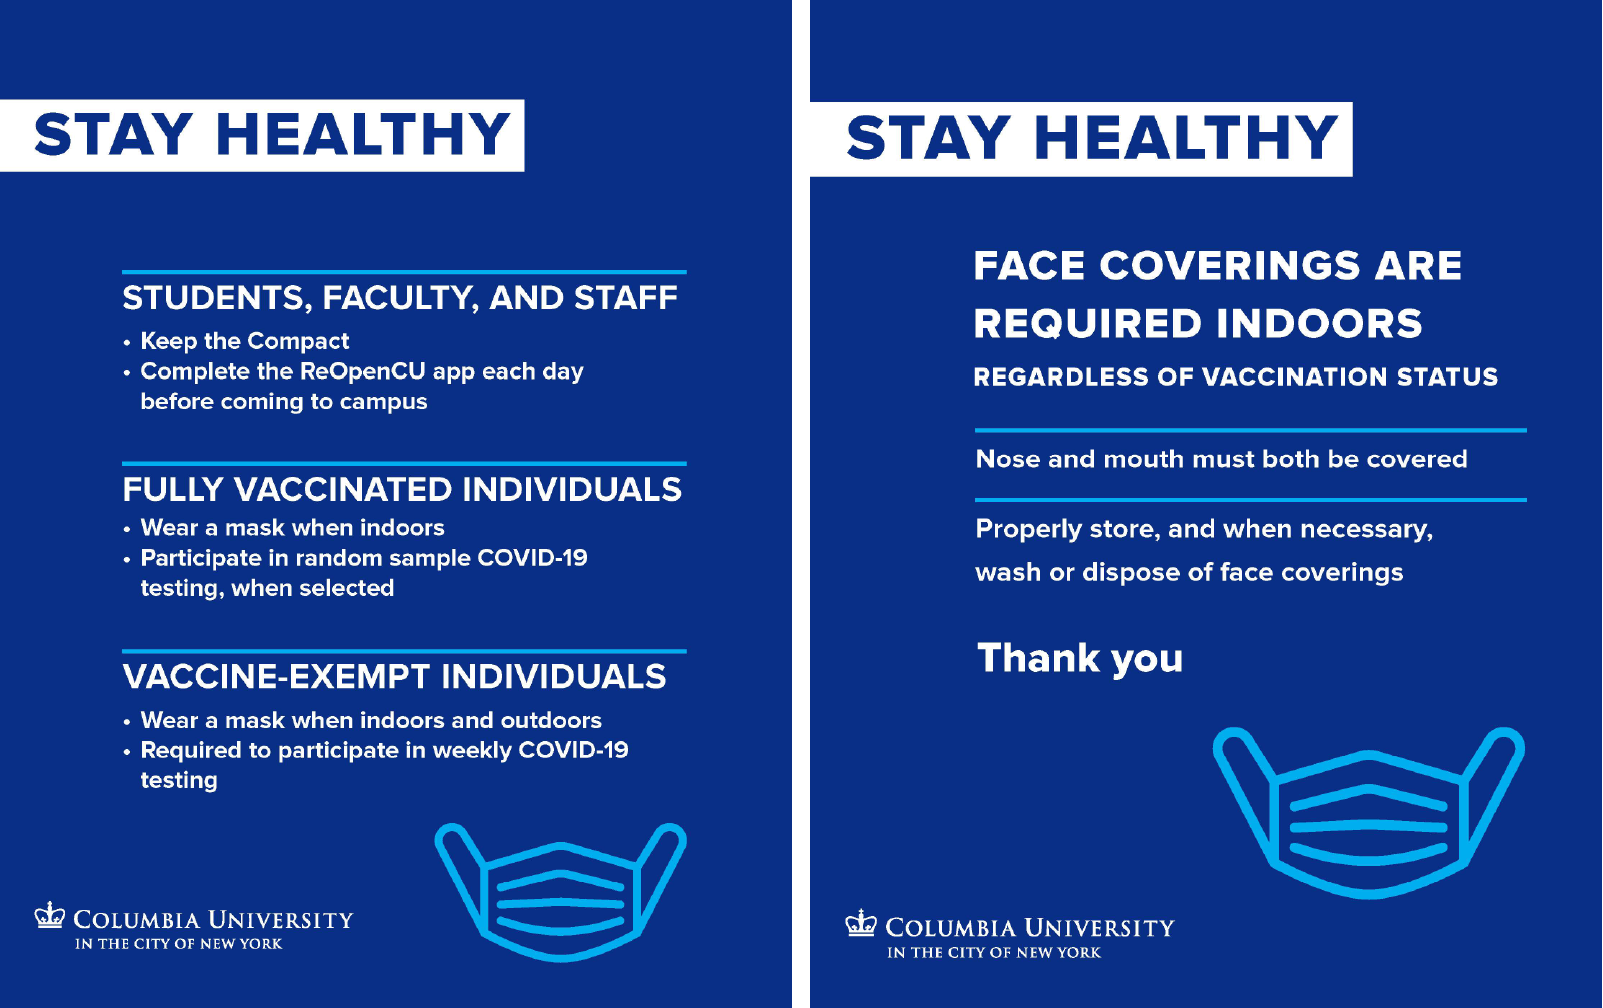 COVID-19 signage. Stay Healthy, face coverings are required indoors.